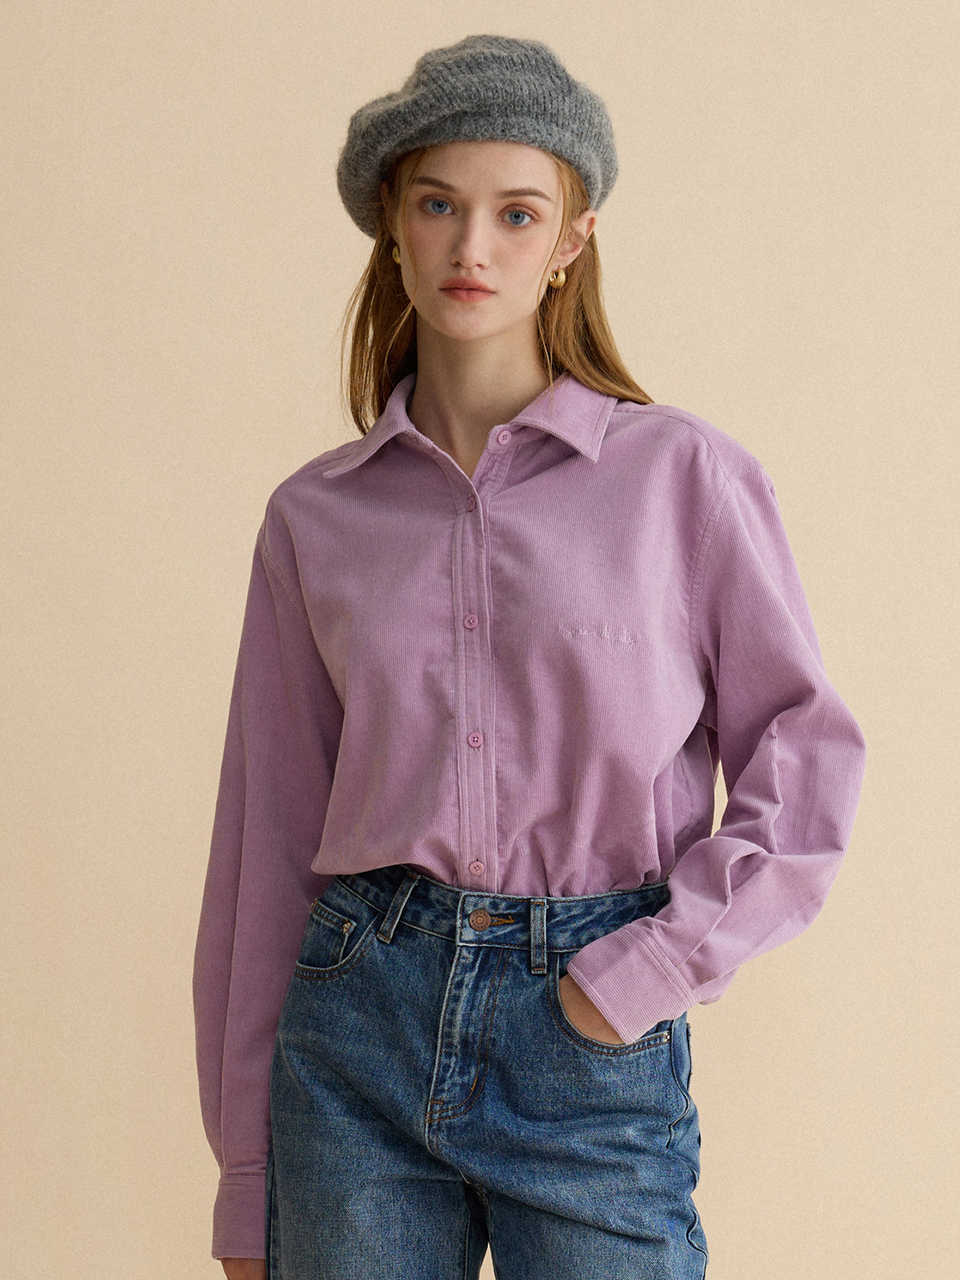 JACE embroidery corduroy shirt_pink lavender